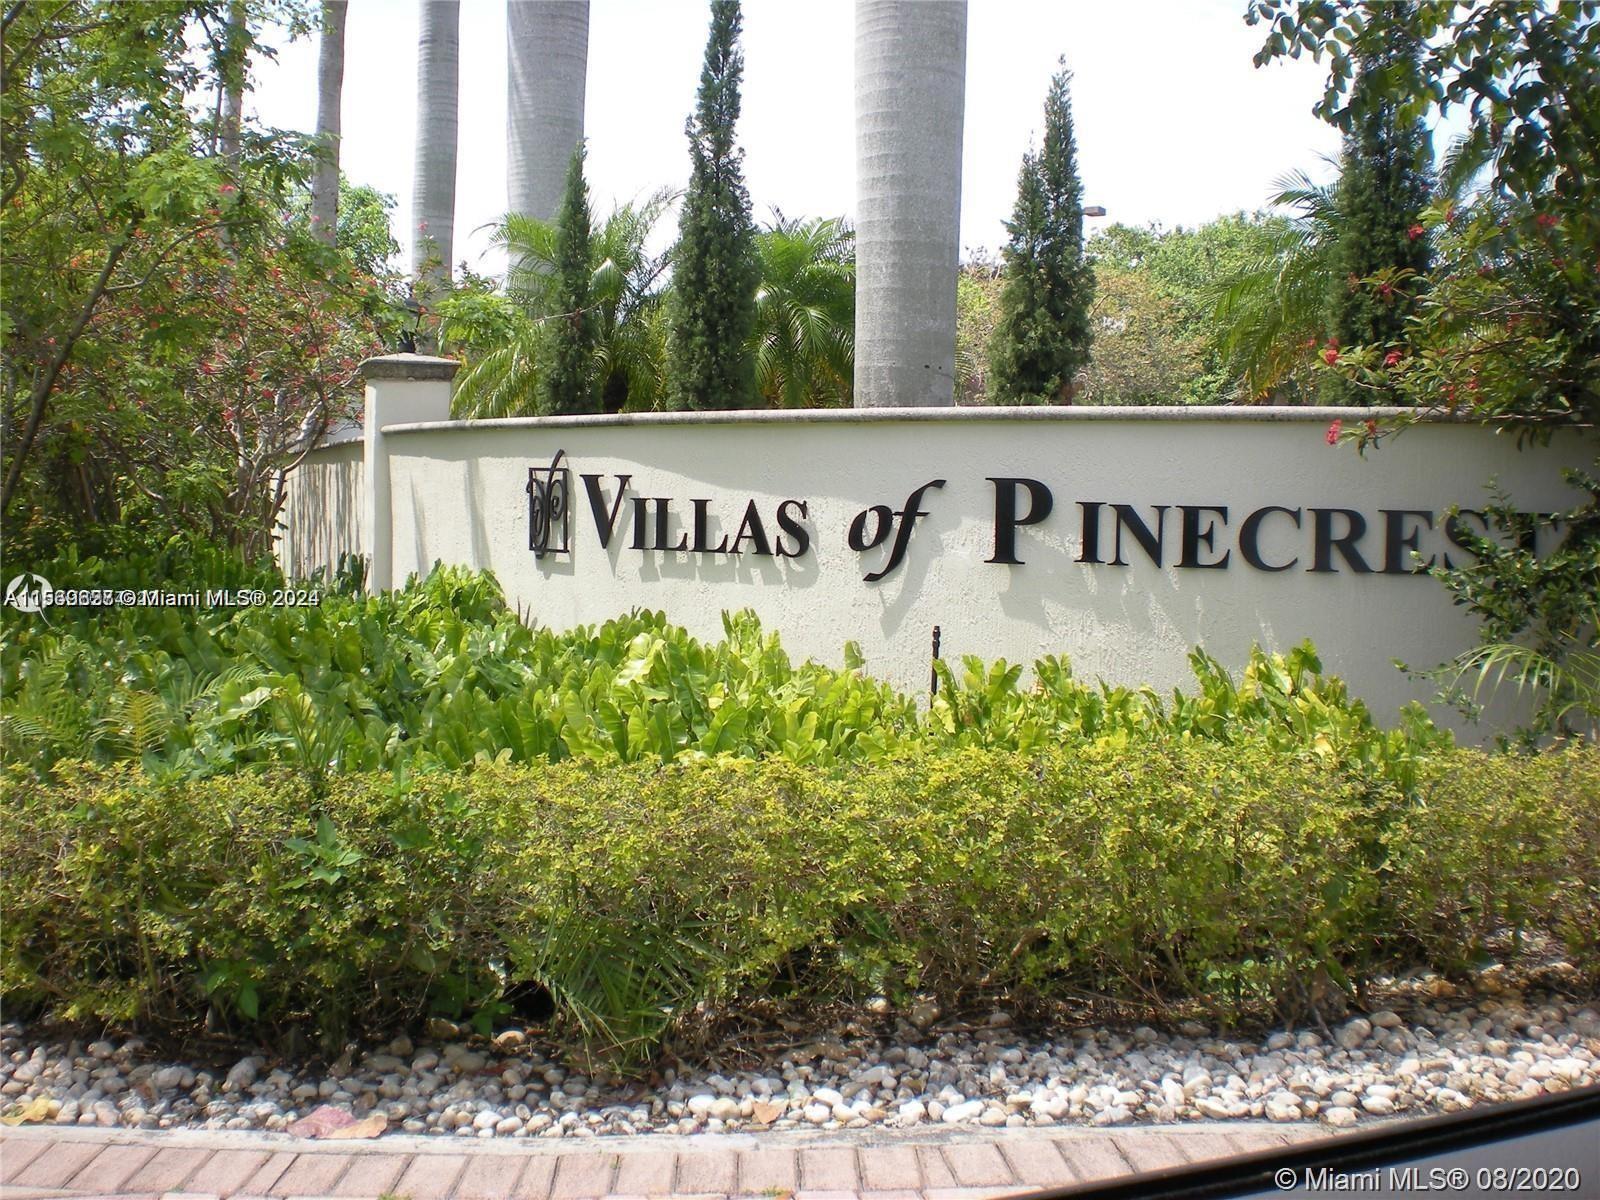 Completely Remodeled Condo at the most desirable zip code (33156). This condo has brand new flooring, Kitchen, Kitchen appliances, Bathroom, Shower, Completely new A/C. Must See! . This condo is located in a gated community with Security , easy access to Palmetto Expressway, with all amenities such as Guest Parking, Pool, Tennis Court, Kids Playground and Picnic area. Conveniently located close to University of Miami. Brand New Washer and Dryer inside Unit. WONT LAST!!!